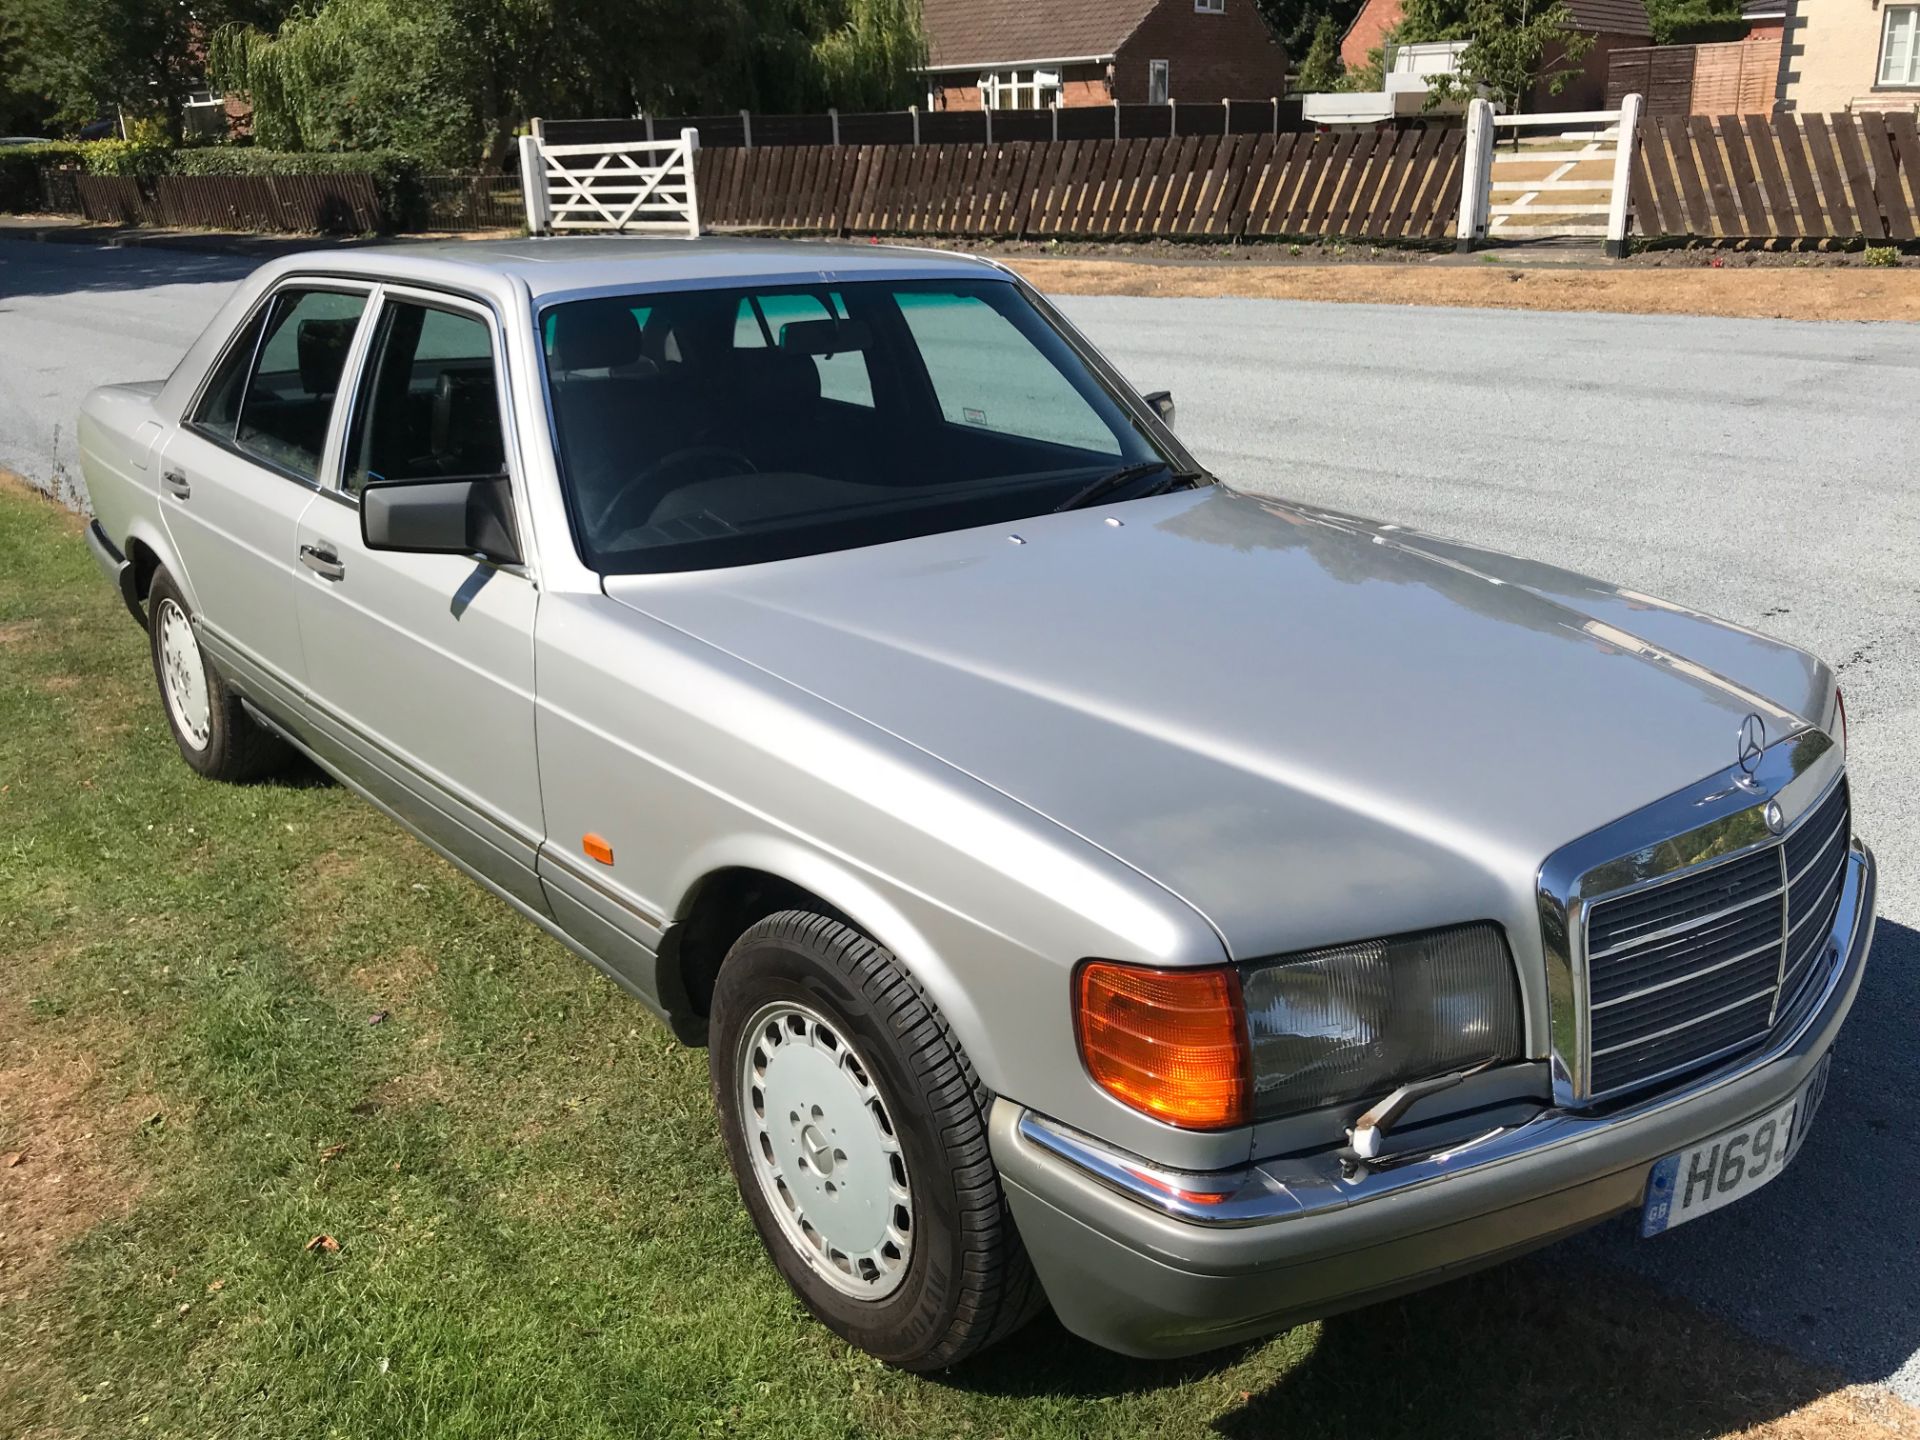 Mercedes 300 SE Automatic - Image 65 of 69